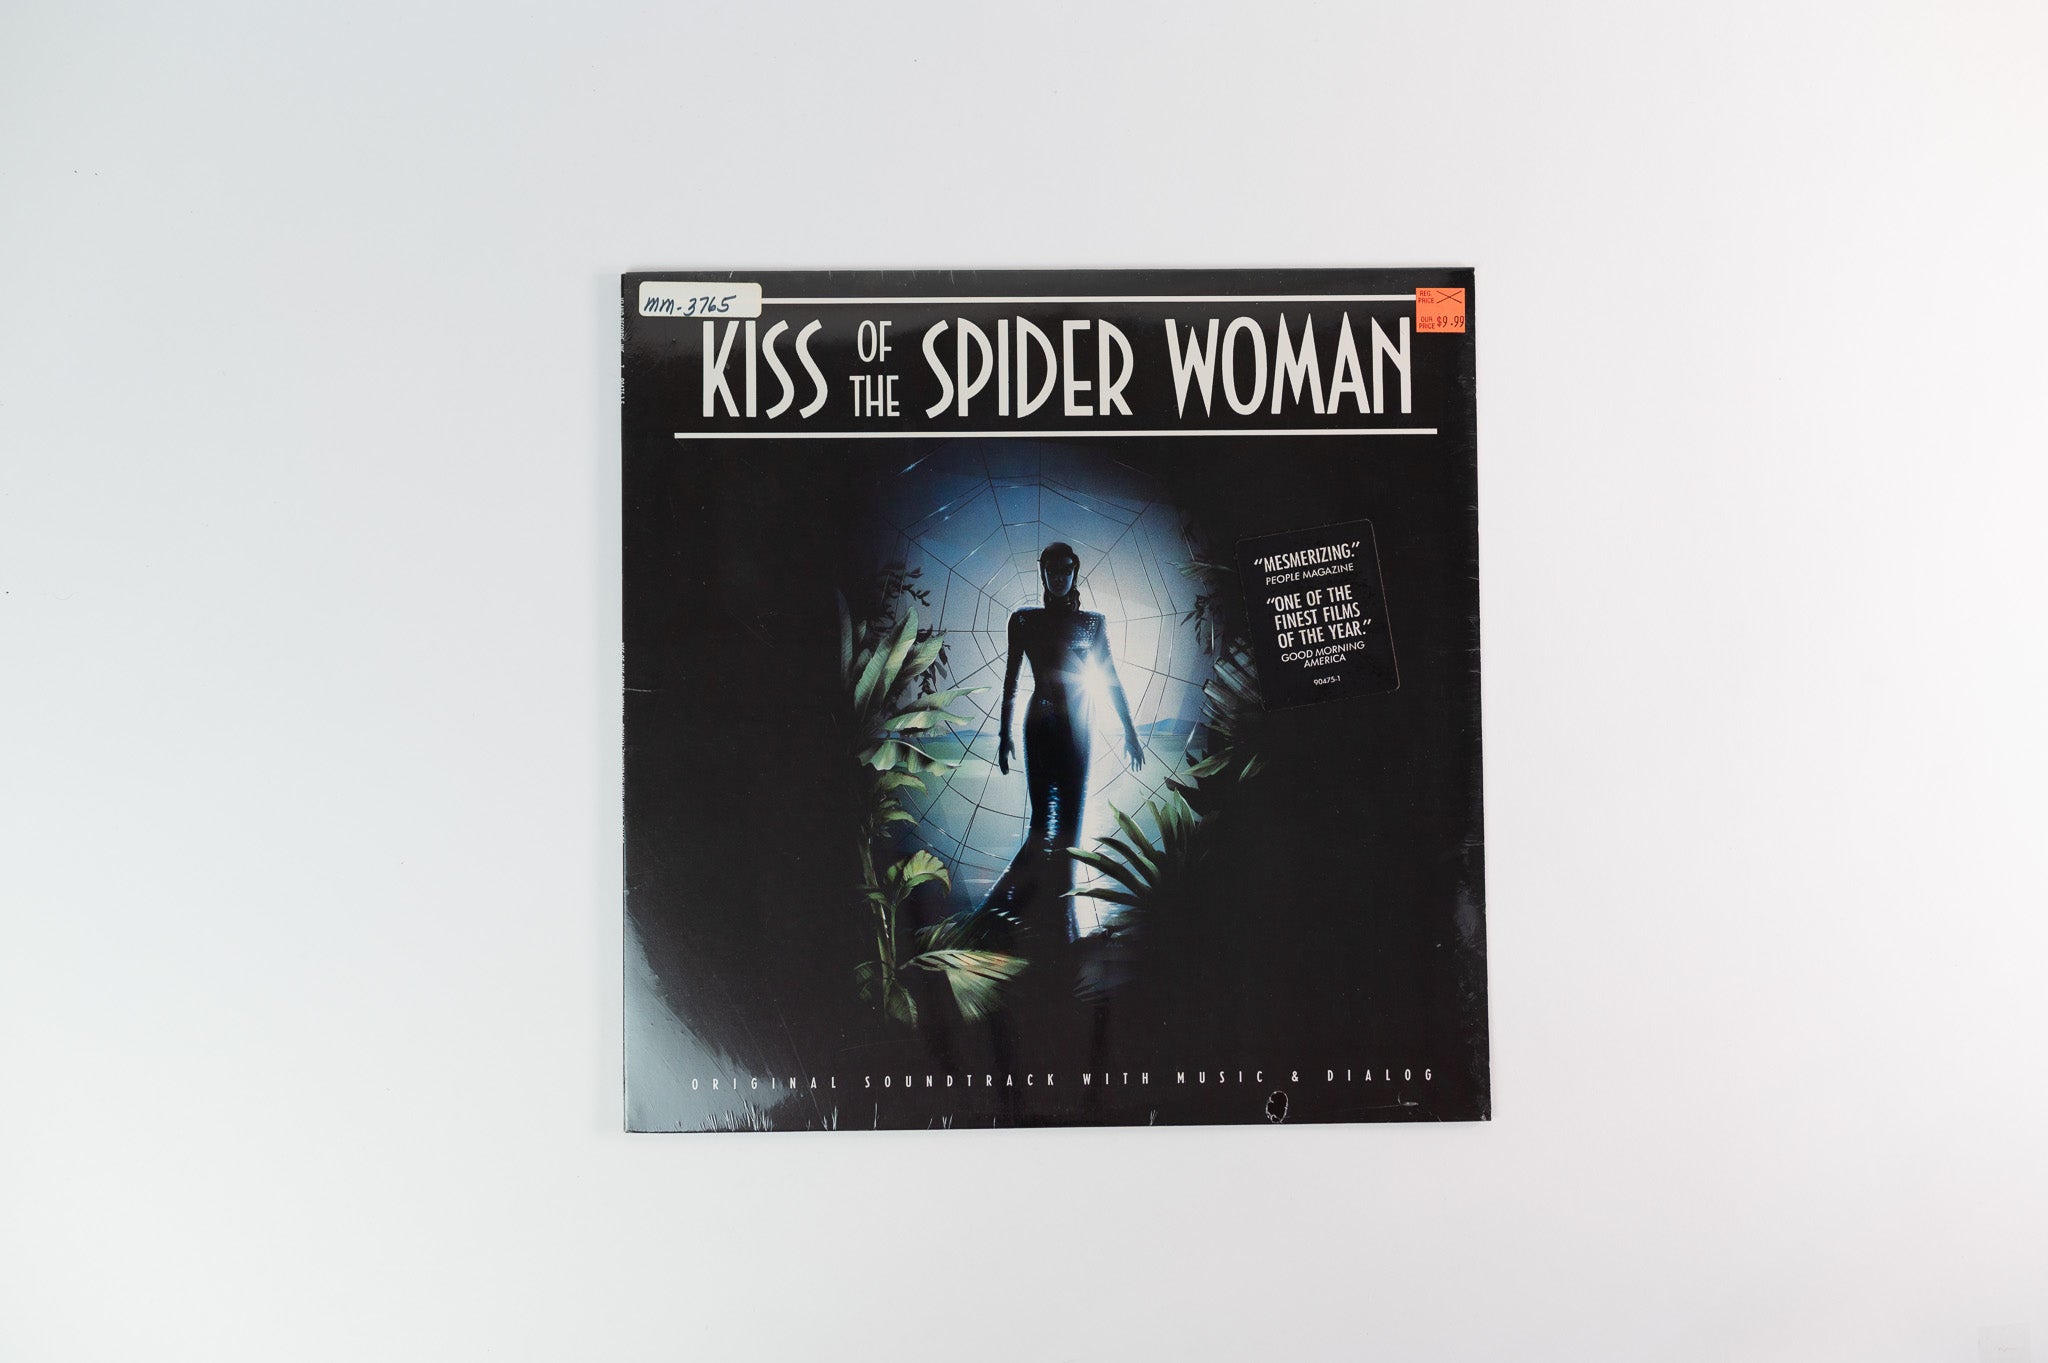 John Neschling - Kiss Of The Spider Woman (Soundtrack & Dialogue) on Island Sealed